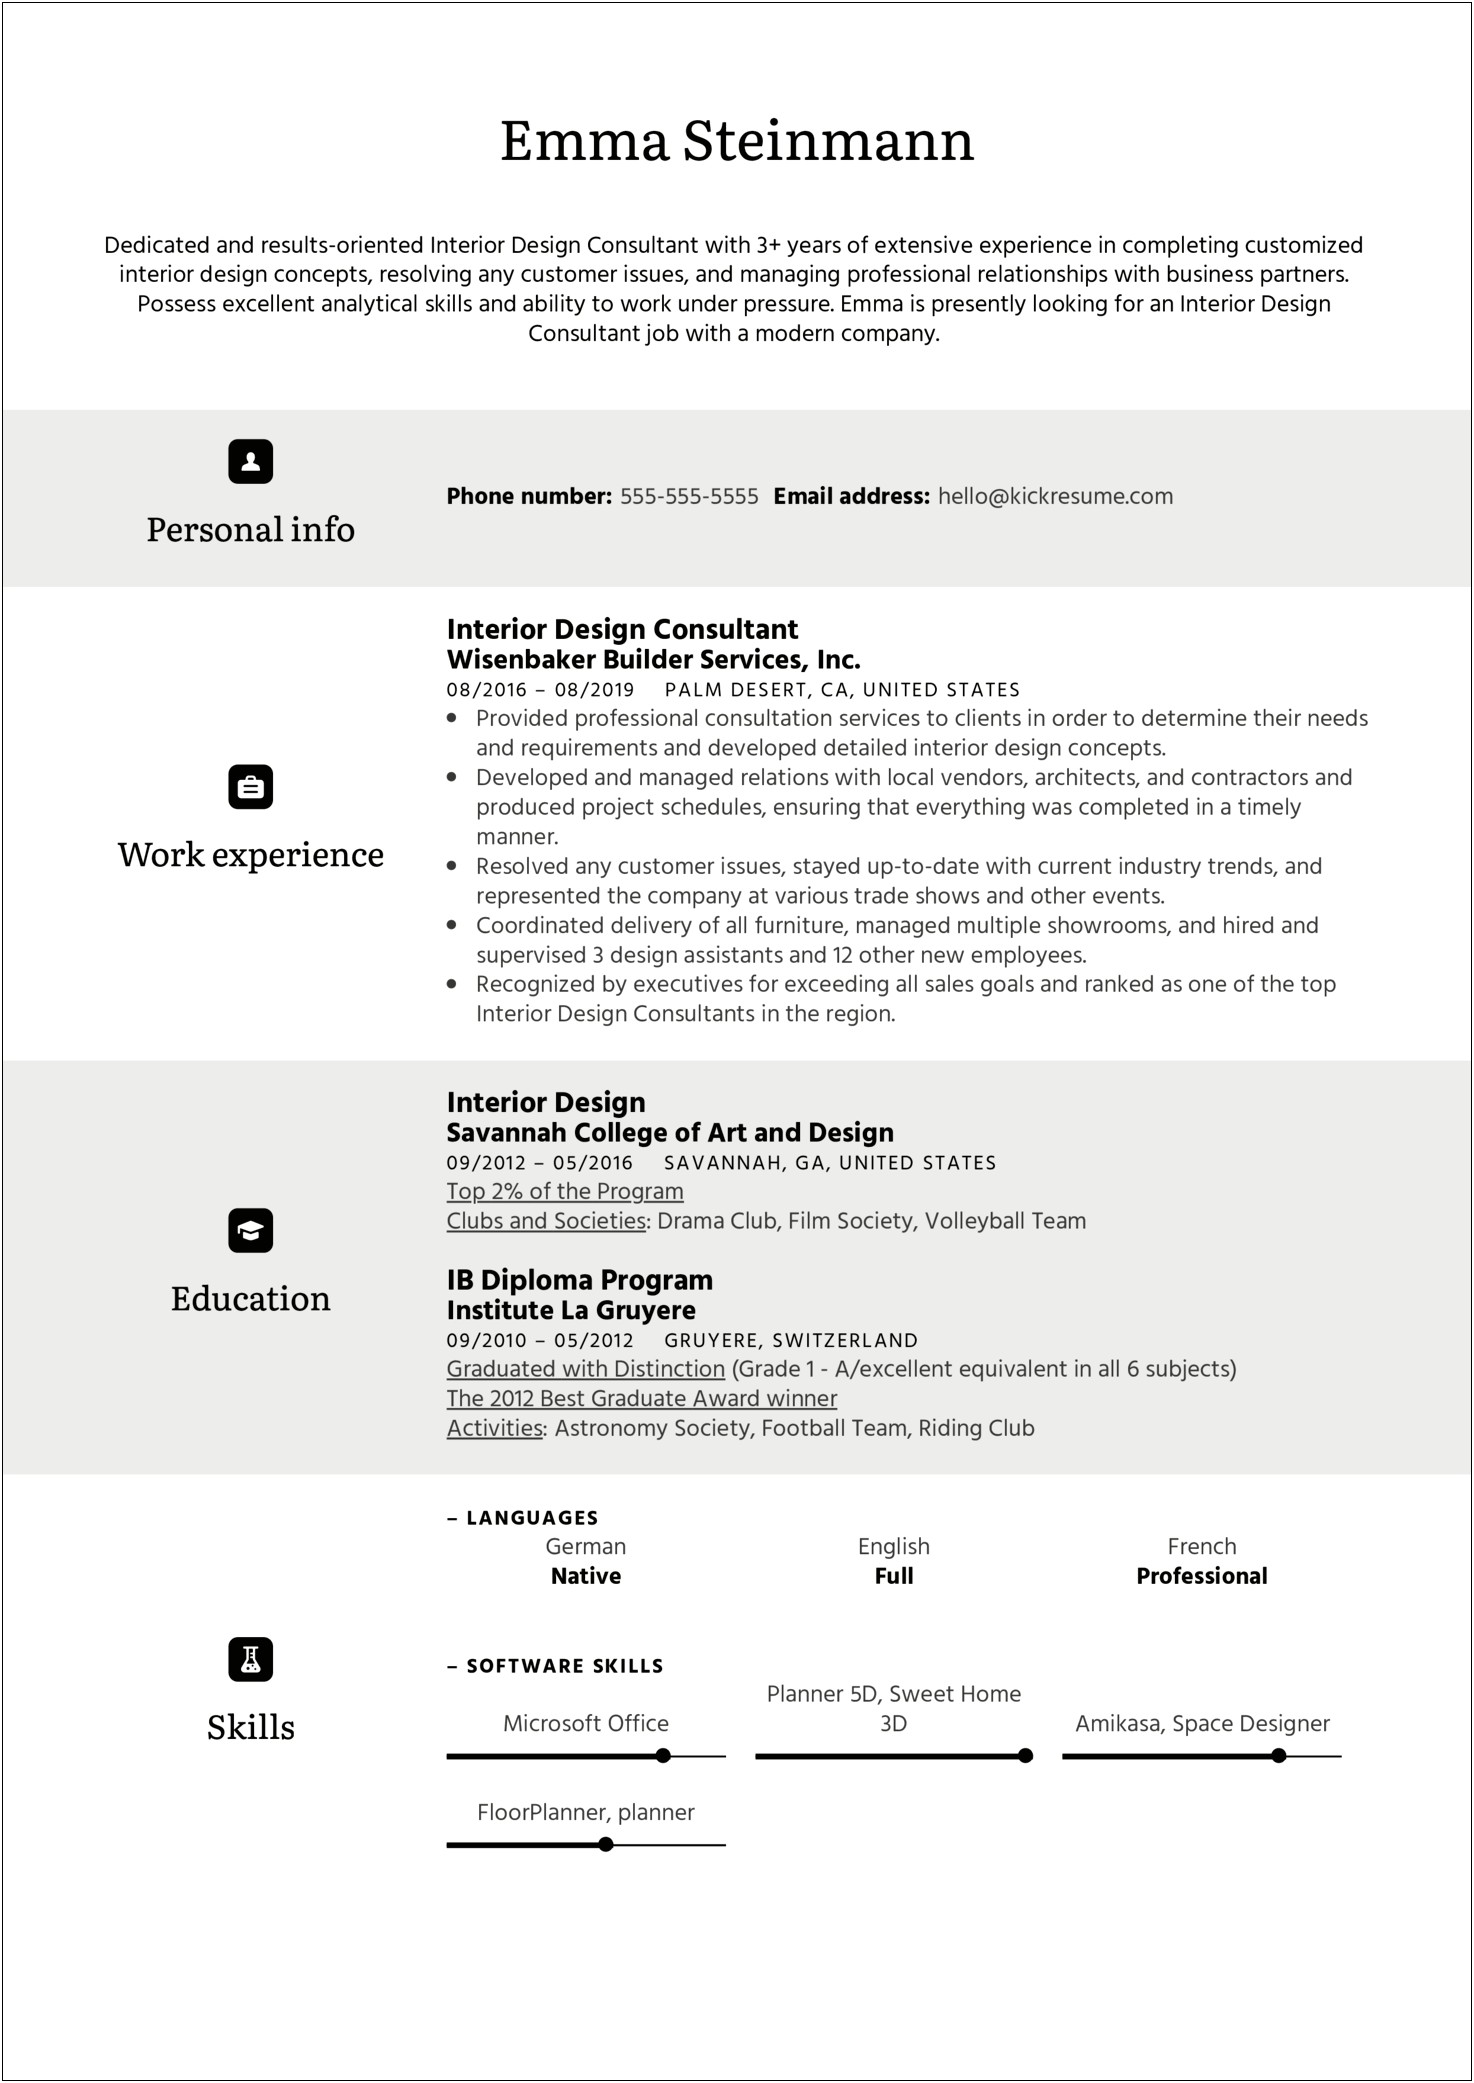 Resume Examples For Consultant Jobs